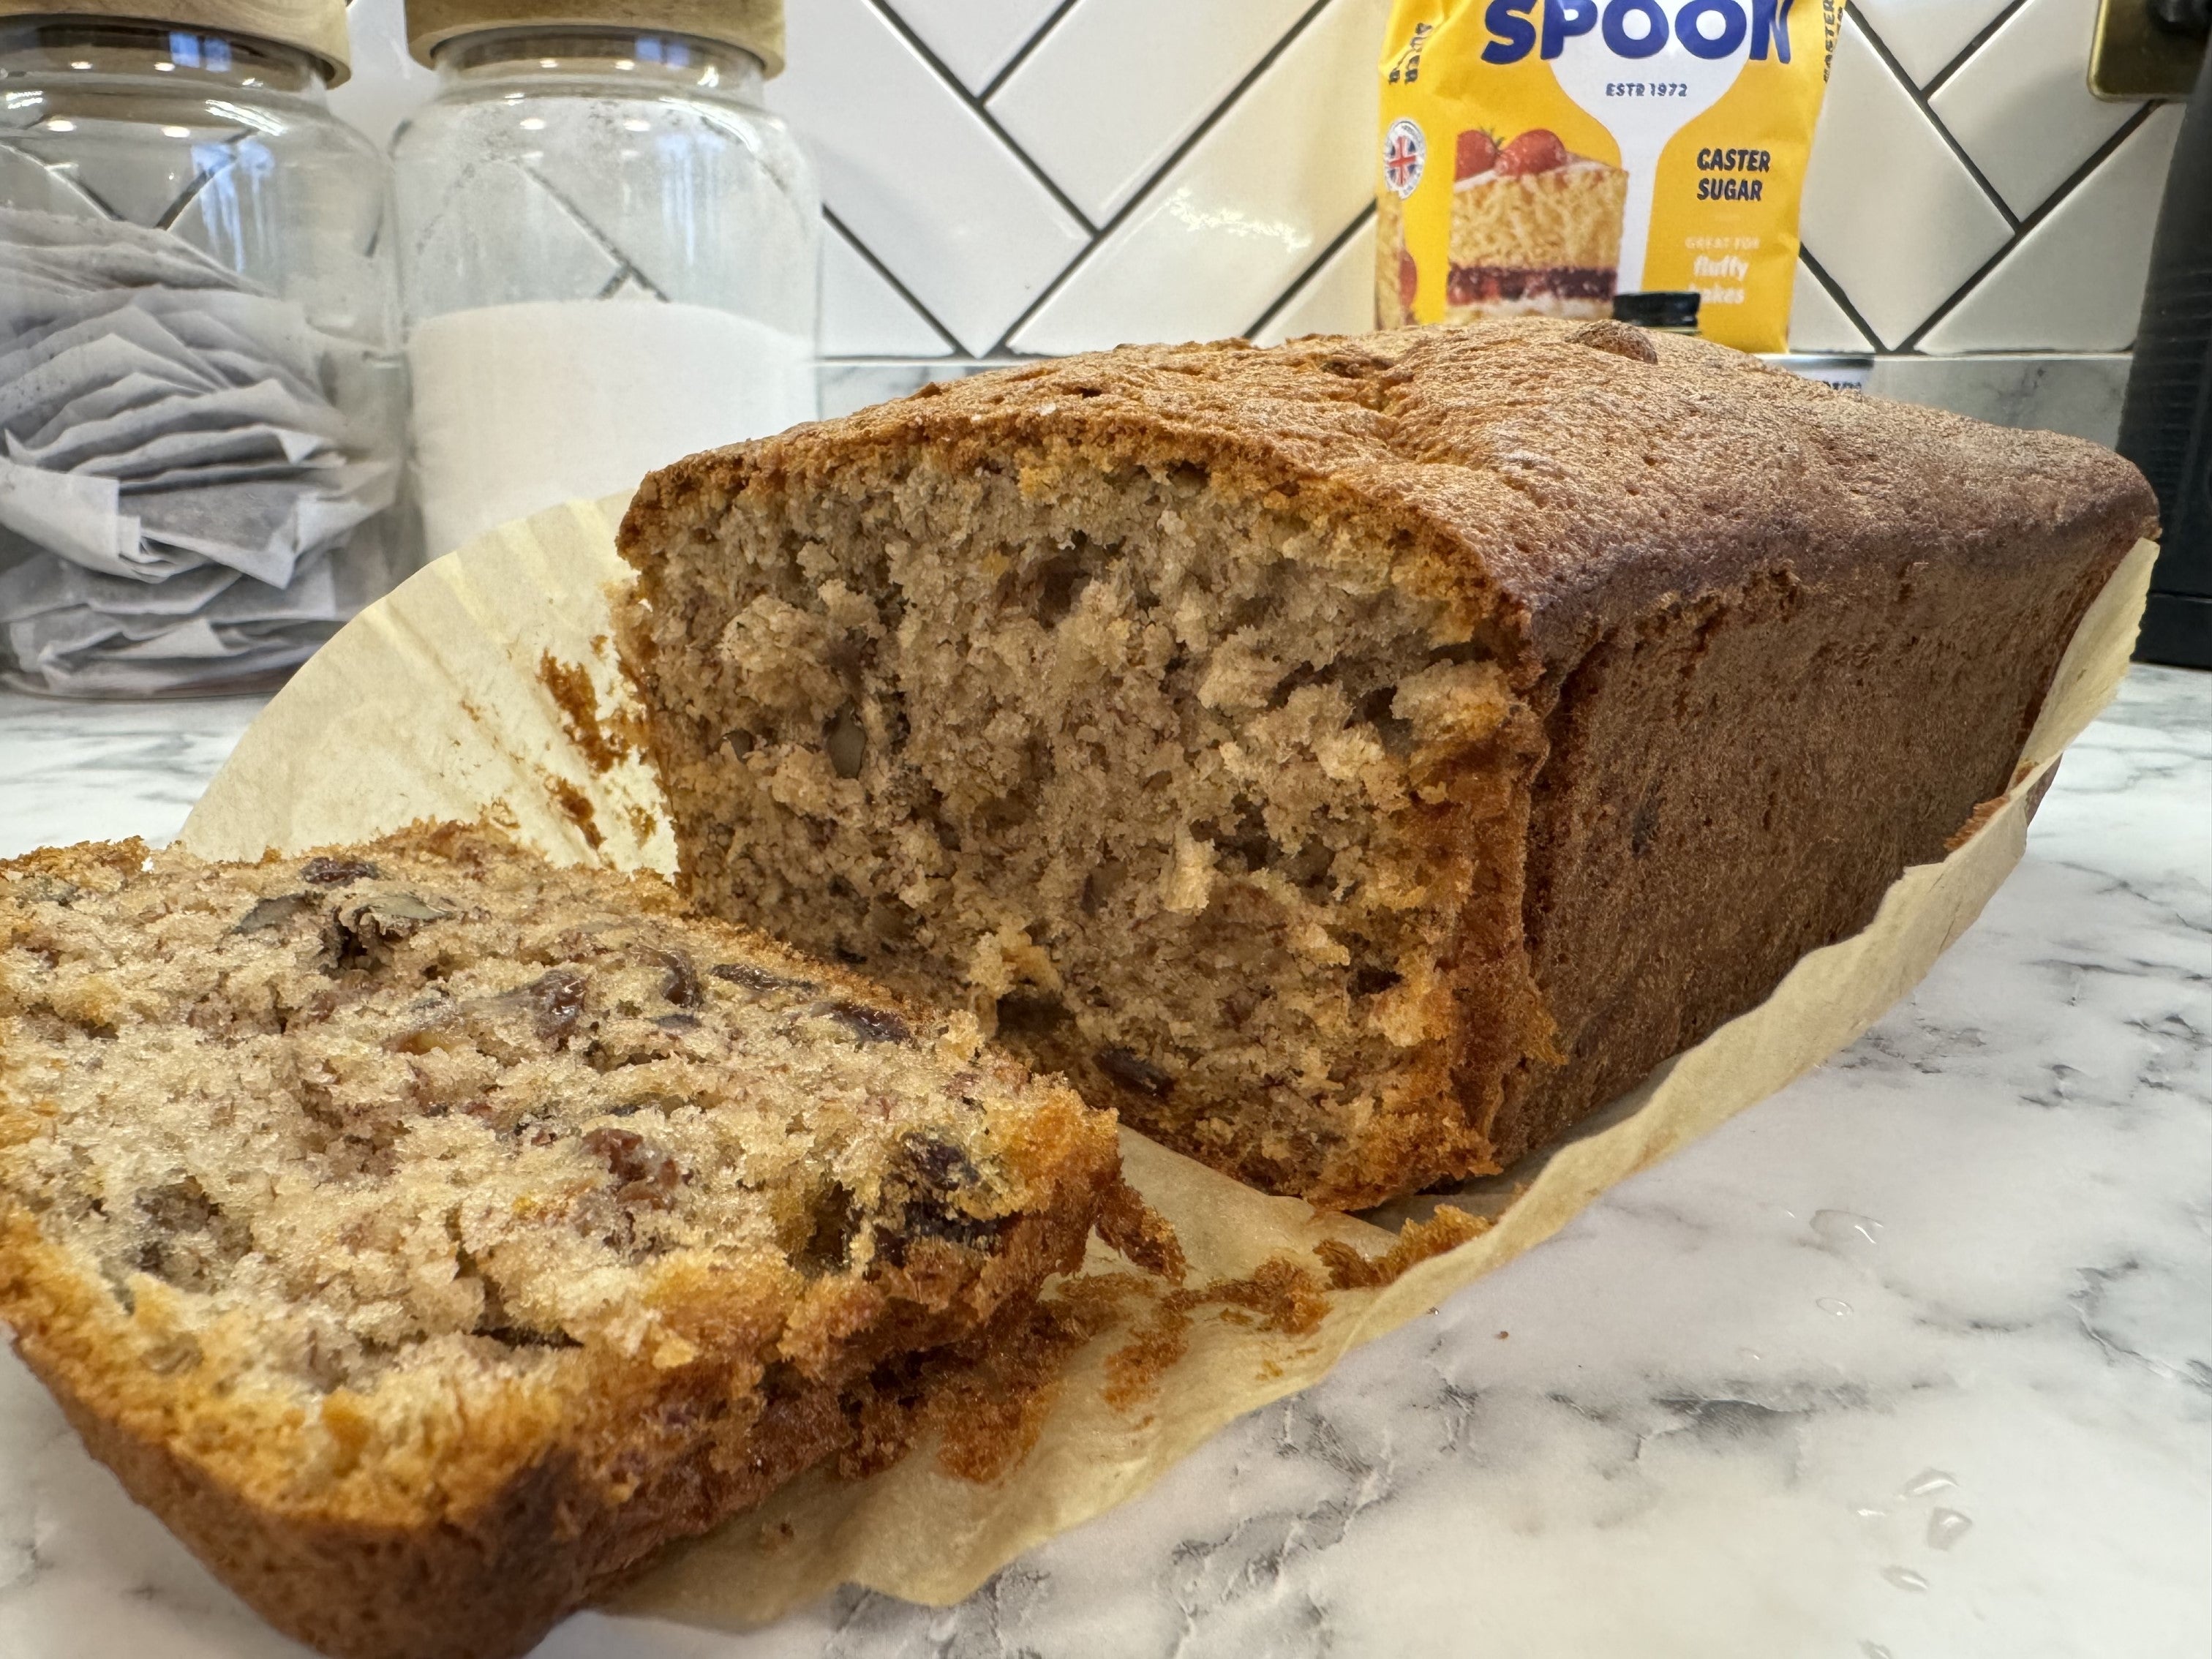 Close-up picture of Nigella Lawson's banana bread on a grey and white marble surface